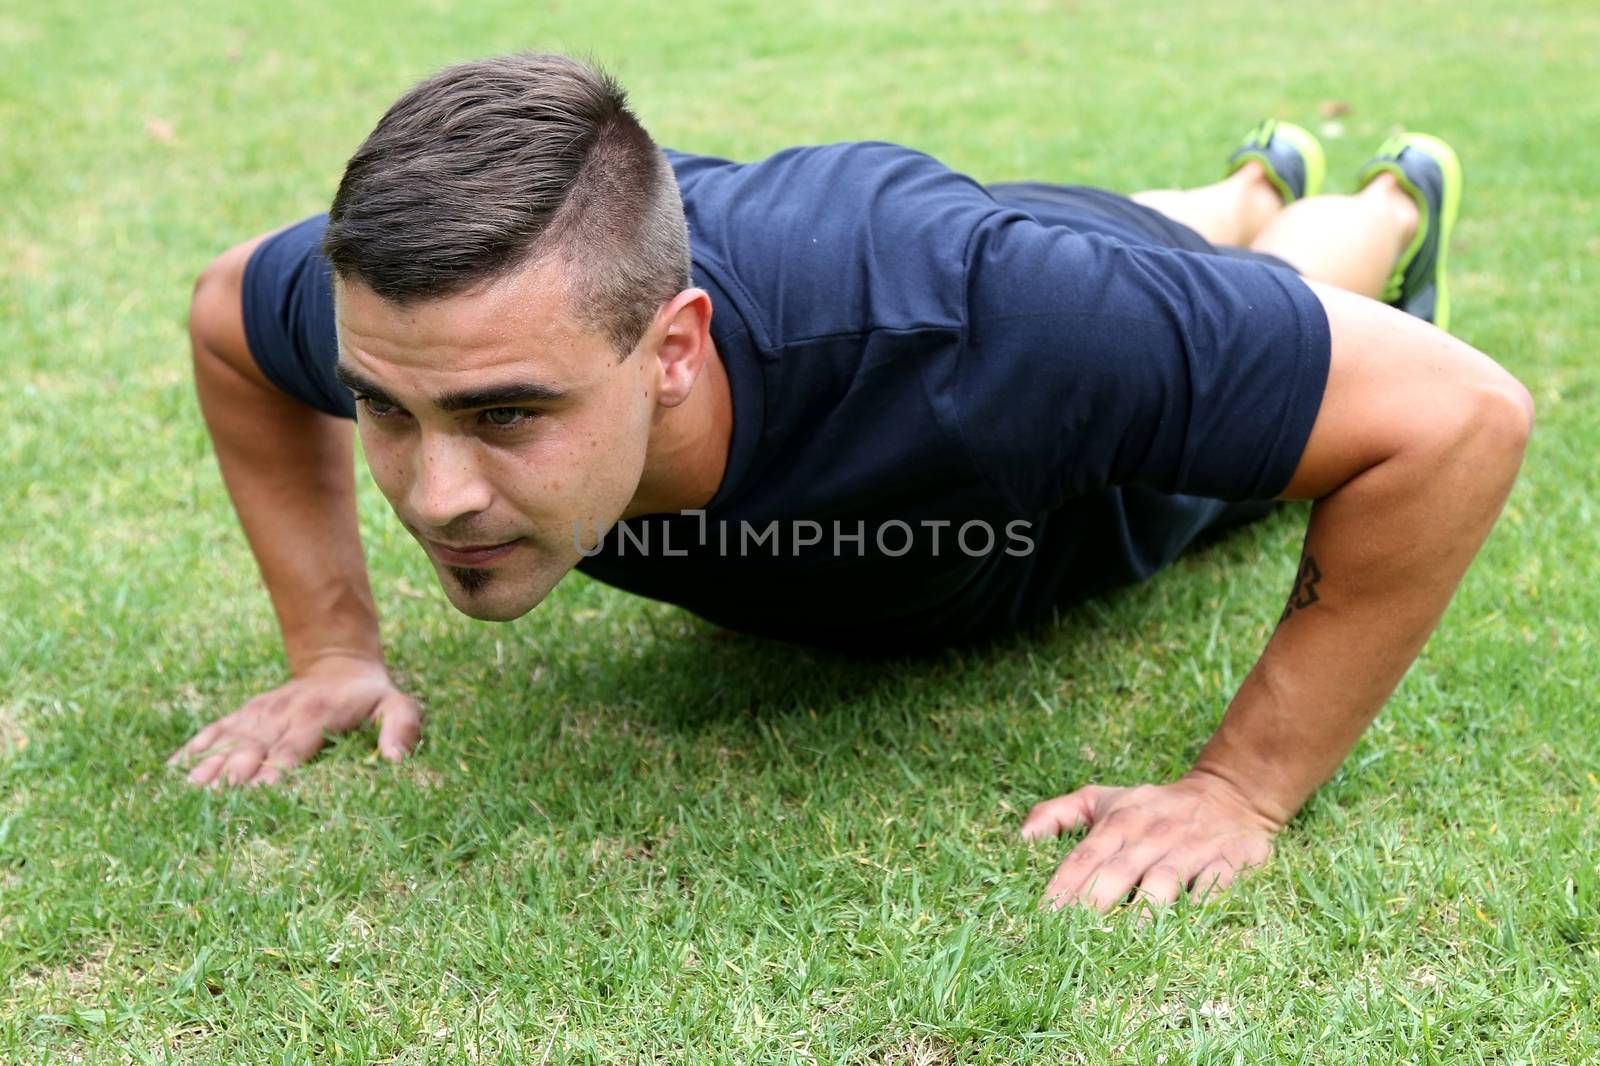 Handsome young man doing pushup exercises outdoors